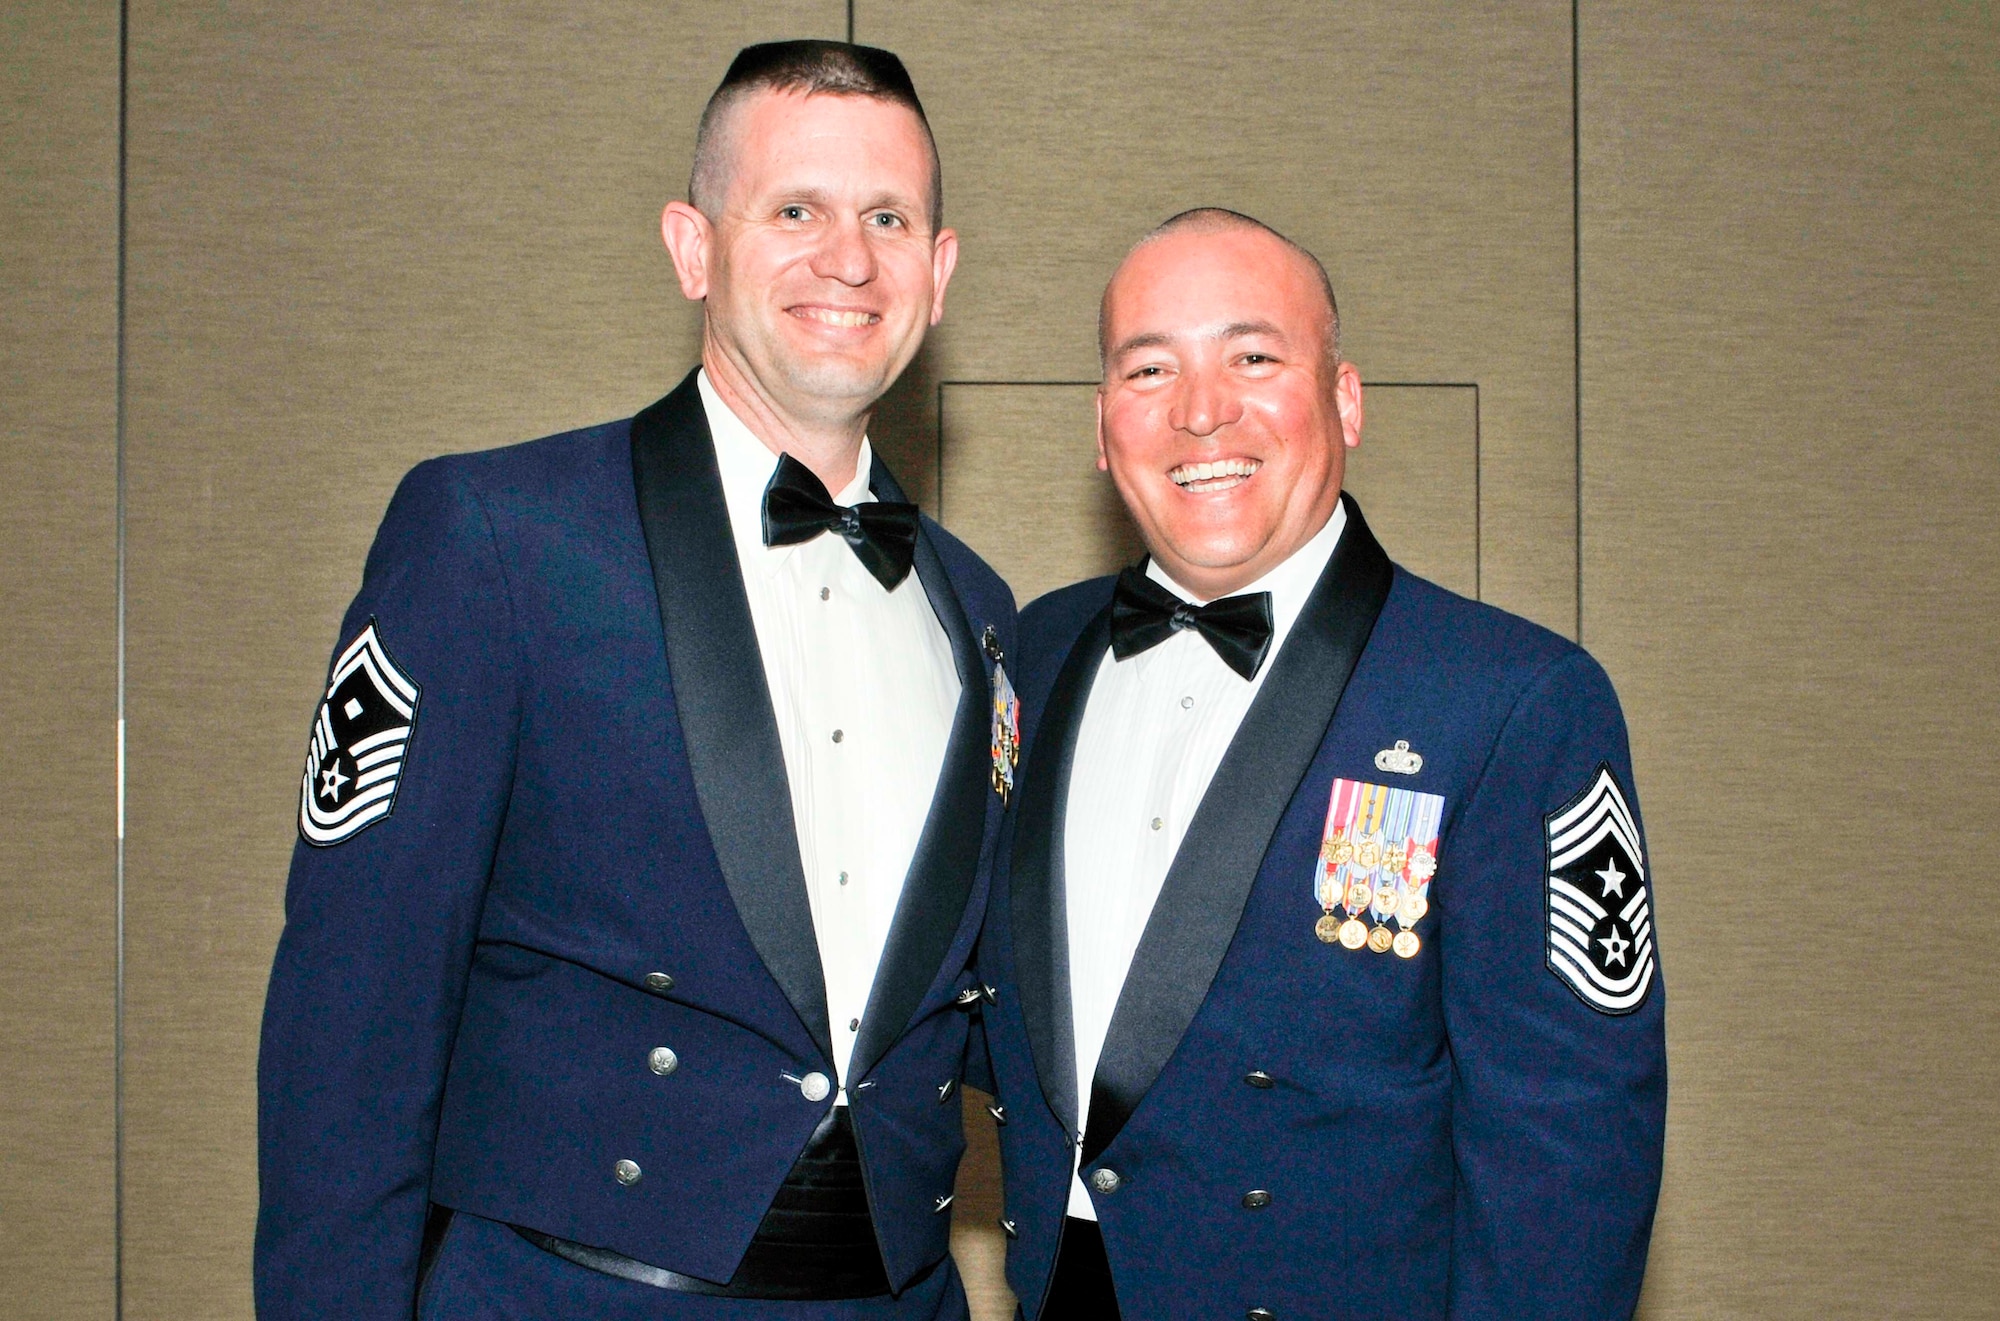 Chief Master Sgt. Mitchell Brush (right), the former Air Forces Northern command chief, and Senior Master Sgt. Thomas Fredrickson, AFNORTH first sergeant, attend the command’s annual award banquet at Tyndall Air Force Base, Fla., March 21. Chief Brush passed responsibility of the command’s enlisted force to Chief Master Sgt. Jim Hotaling during a transfer of authority ceremony at Tyndall March 23. (U.S. Air Force photo by Susan Trahan) 